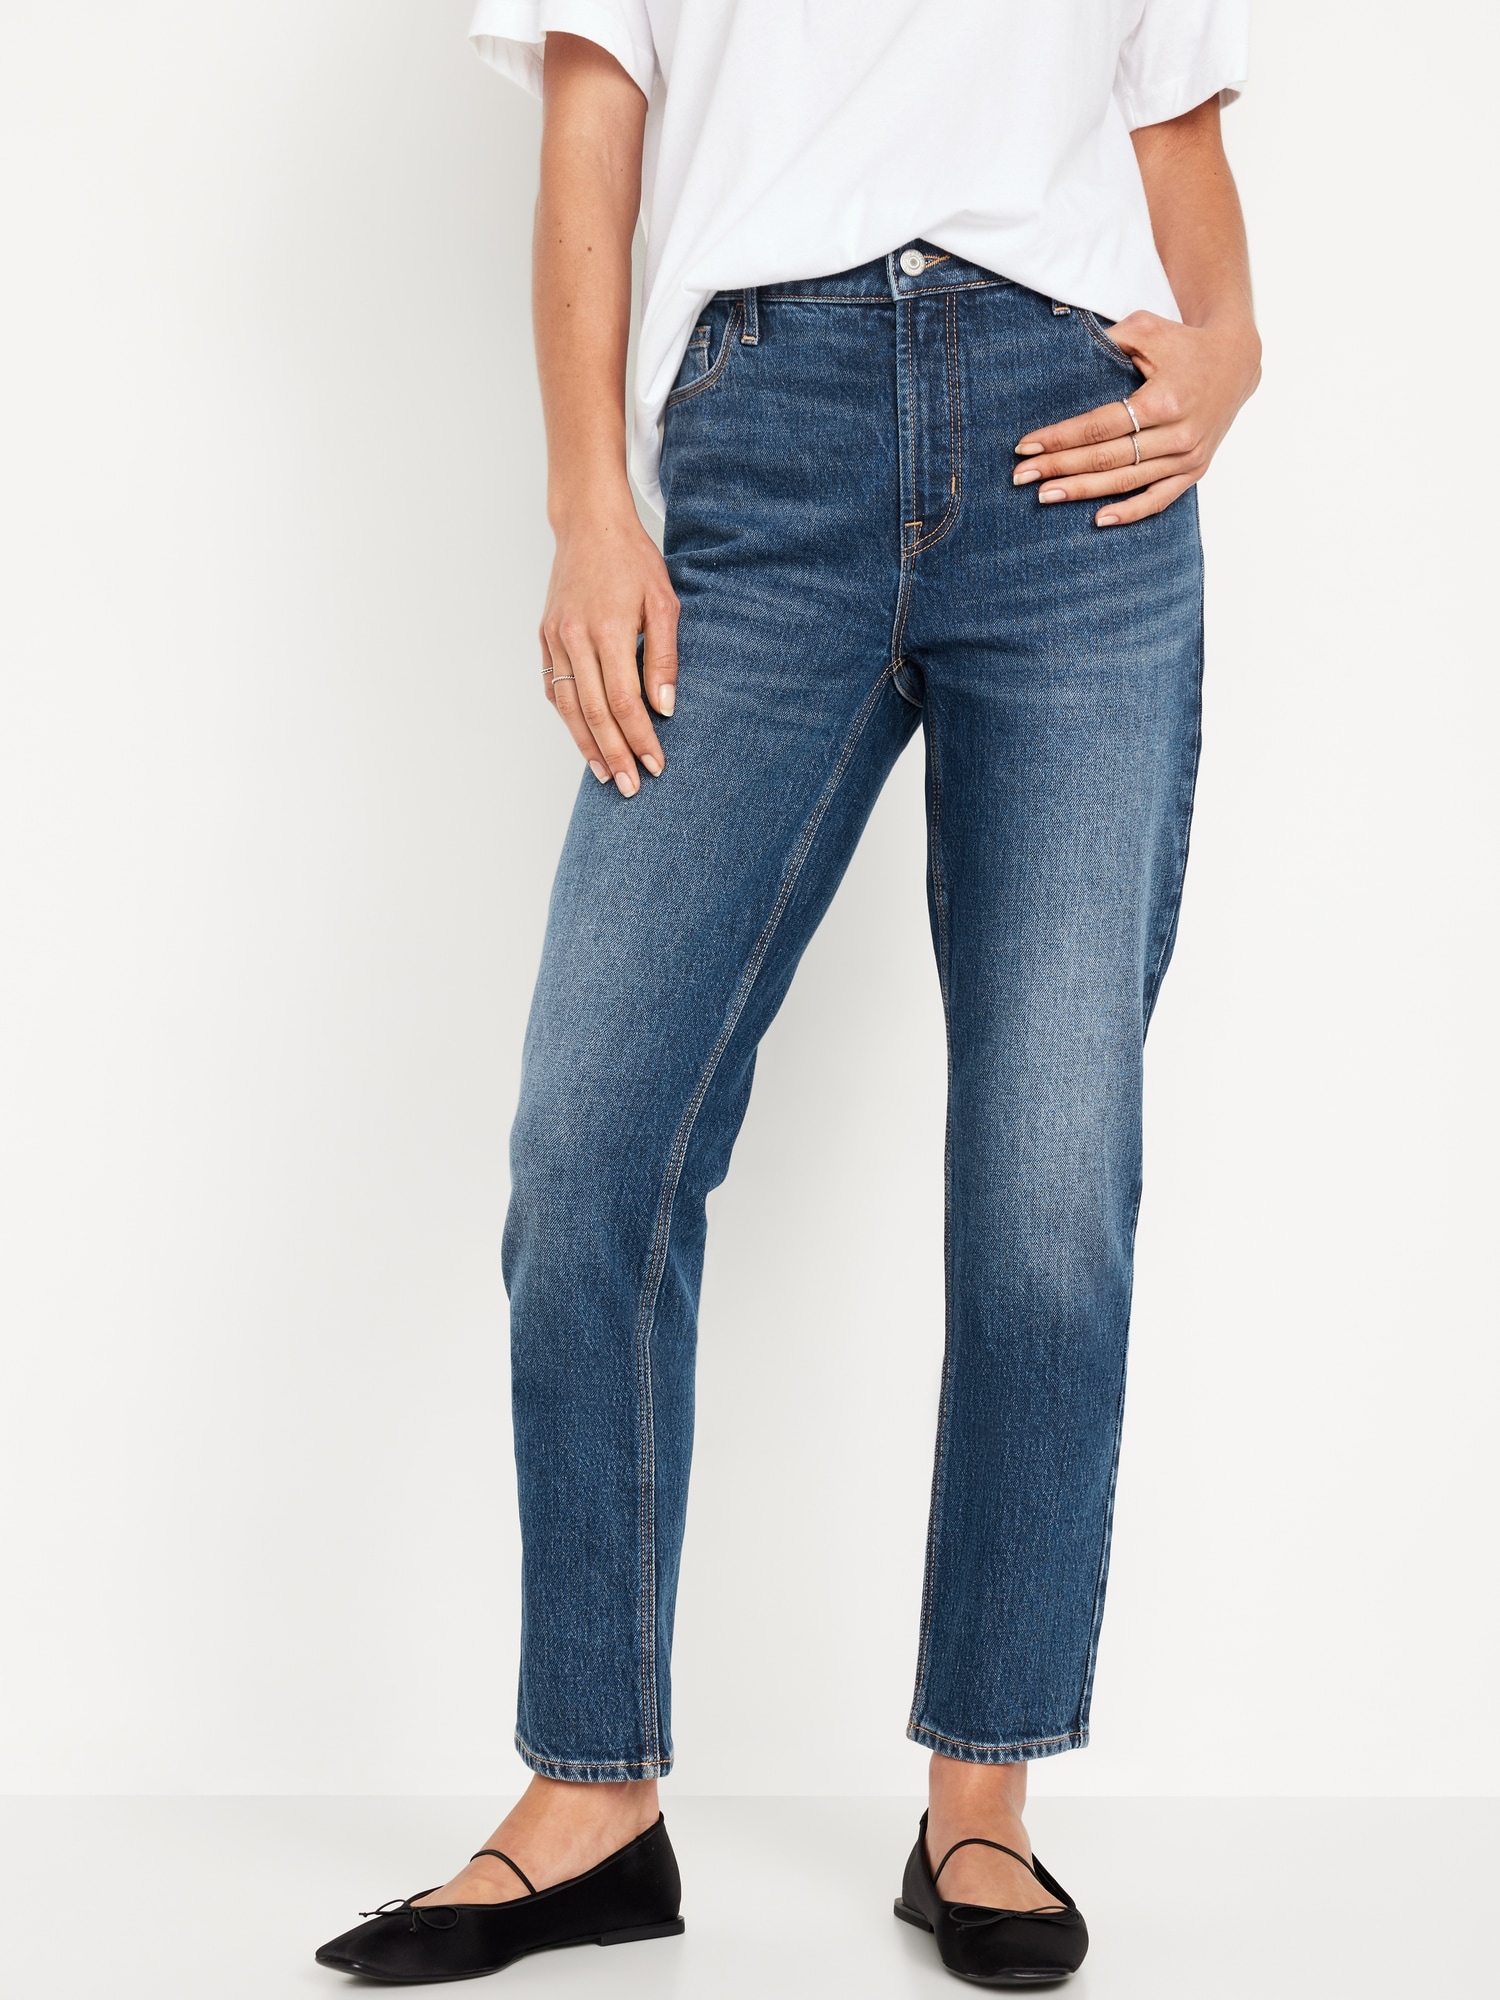 Old Navy High rise woman jeans size 8 — Family Tree Resale 1